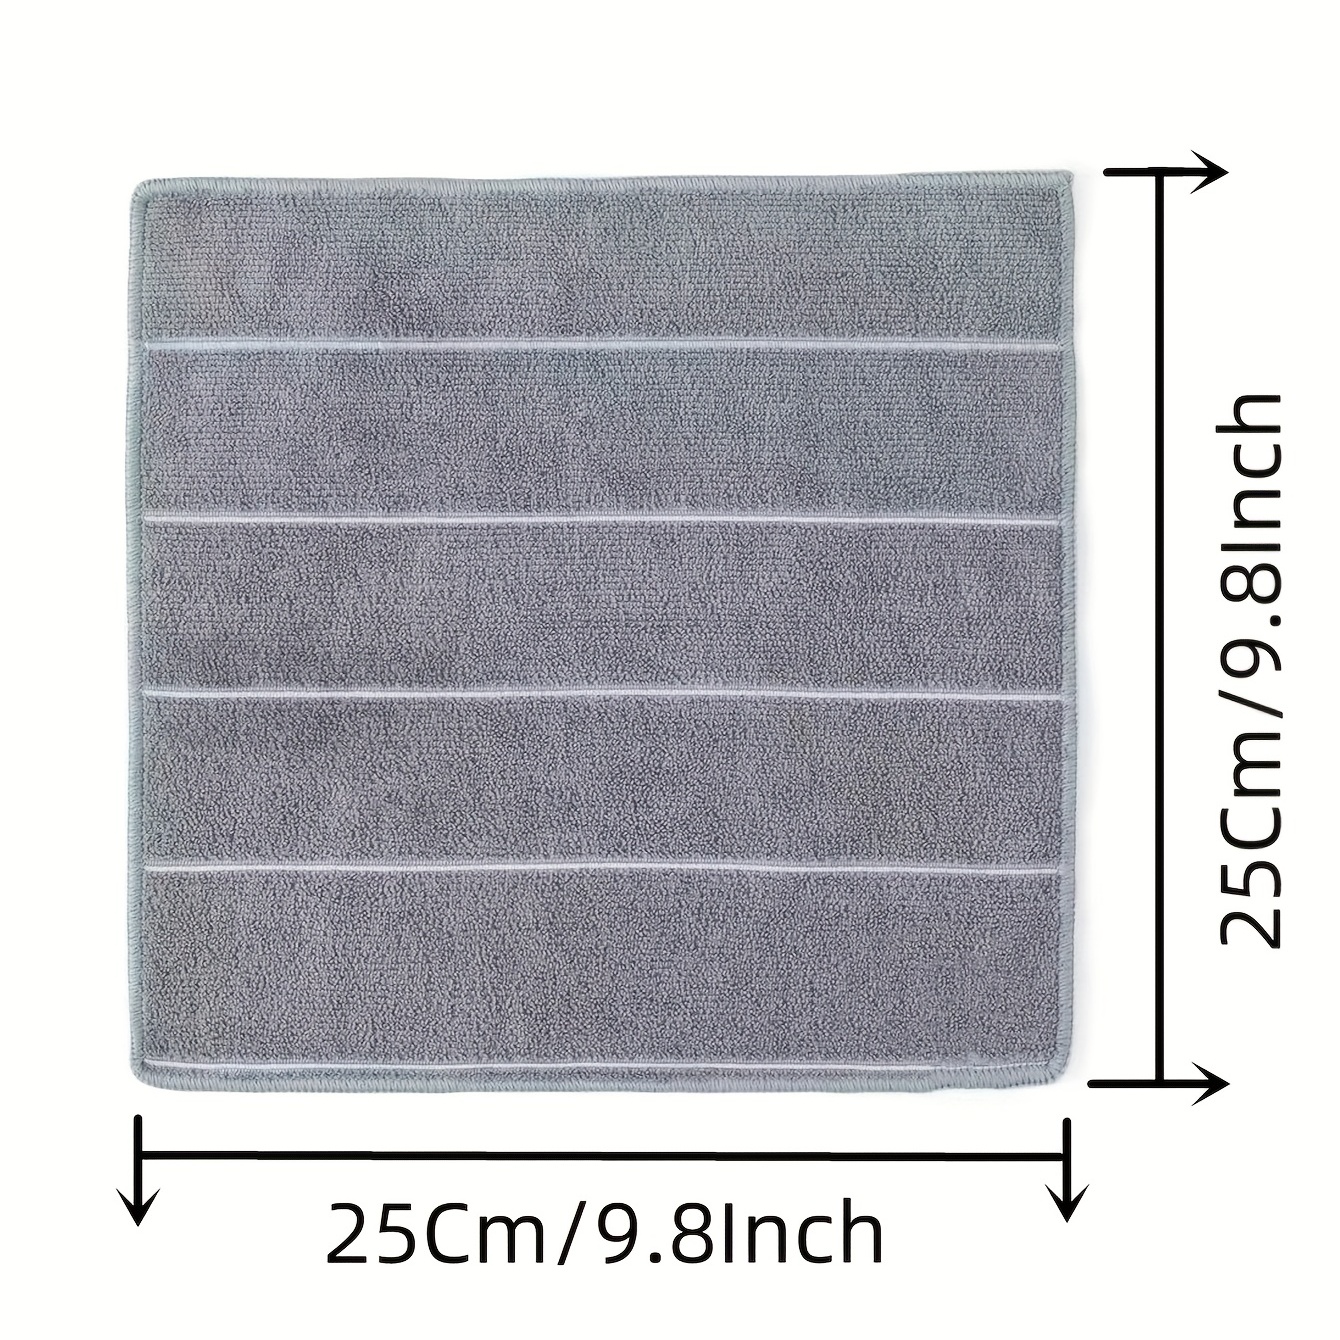 Microfiber Kitchen Towels - Super Absorbent Soft and Solid Color Dish Towels 8 Pack (Stripe Designed Grey and White Colors) 26 x 18 inch